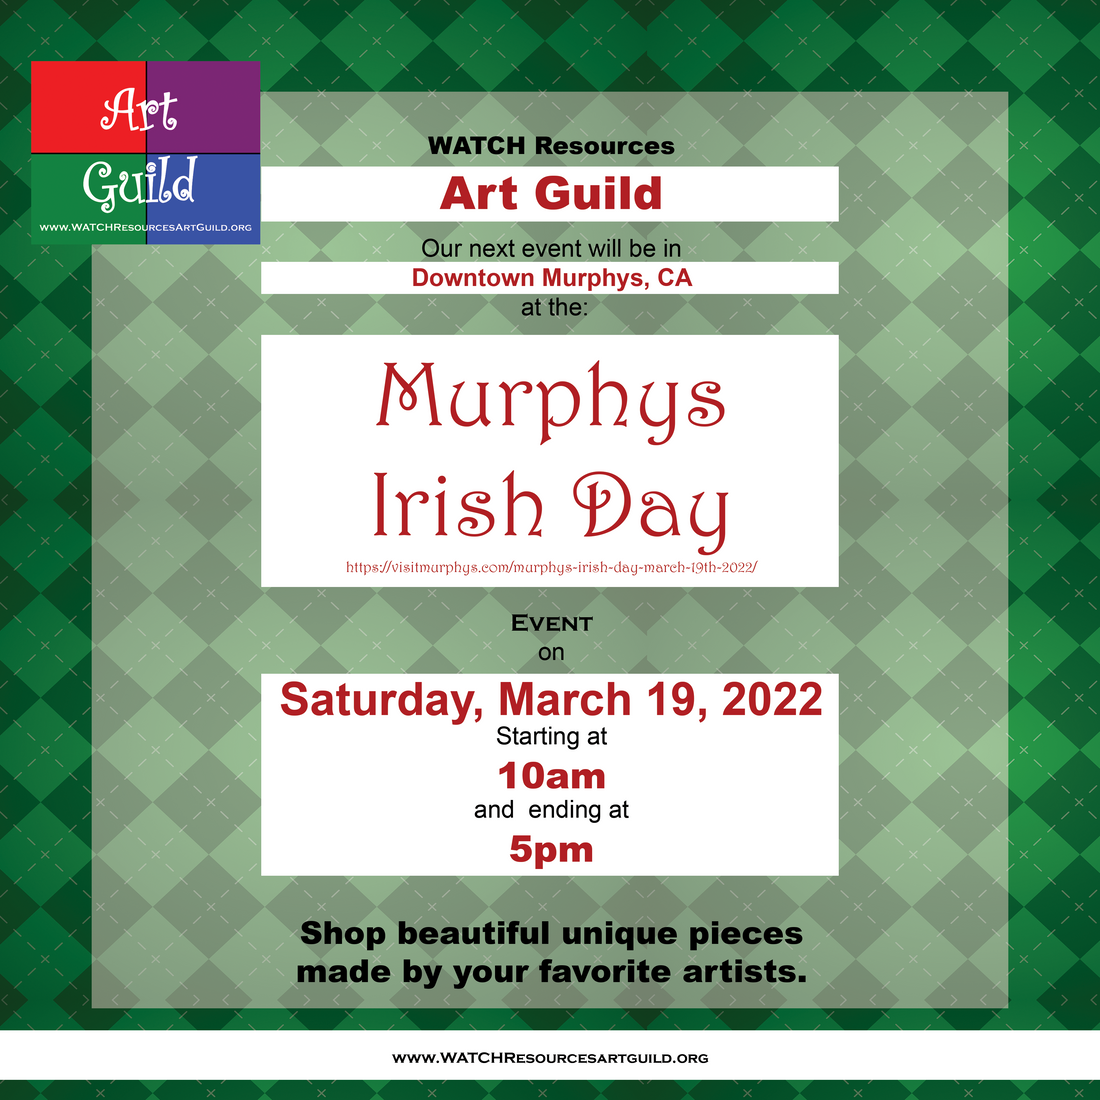 WATCH Resources Art Guild Vendor Event at Murphy's Irish Day in Downtown Murphy, CA March 19th, 2022